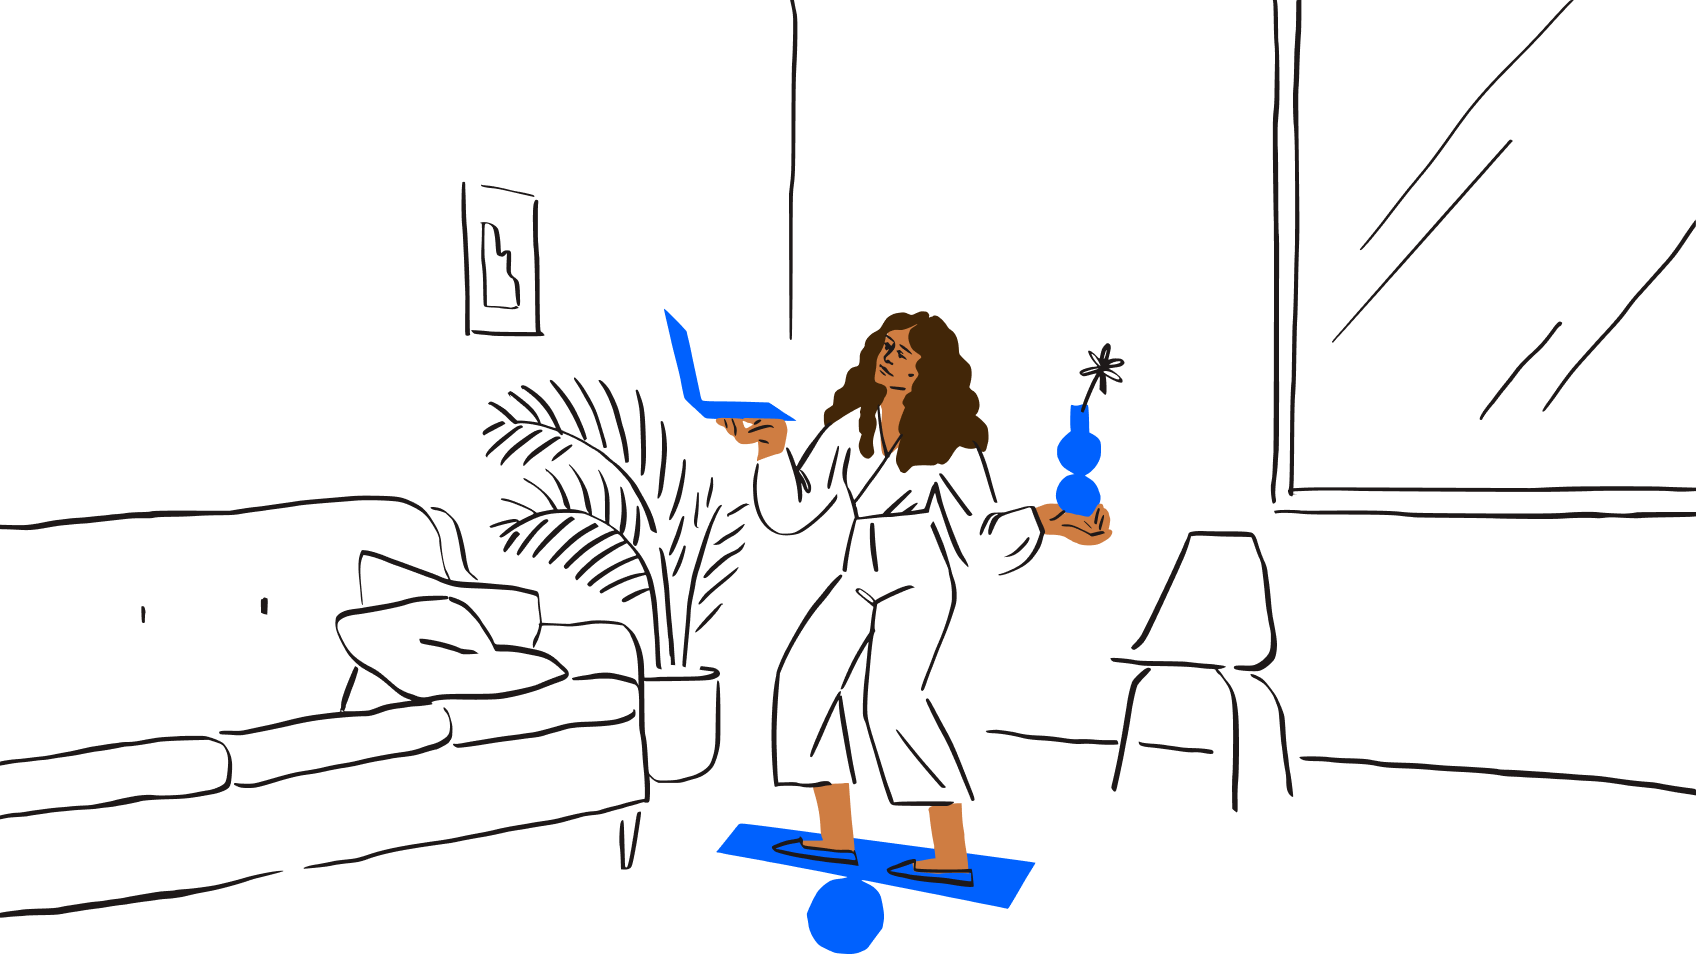 An illustration of a person holding a laptop and houseplant while standing on a balance board, representing the challenges of multitasking.